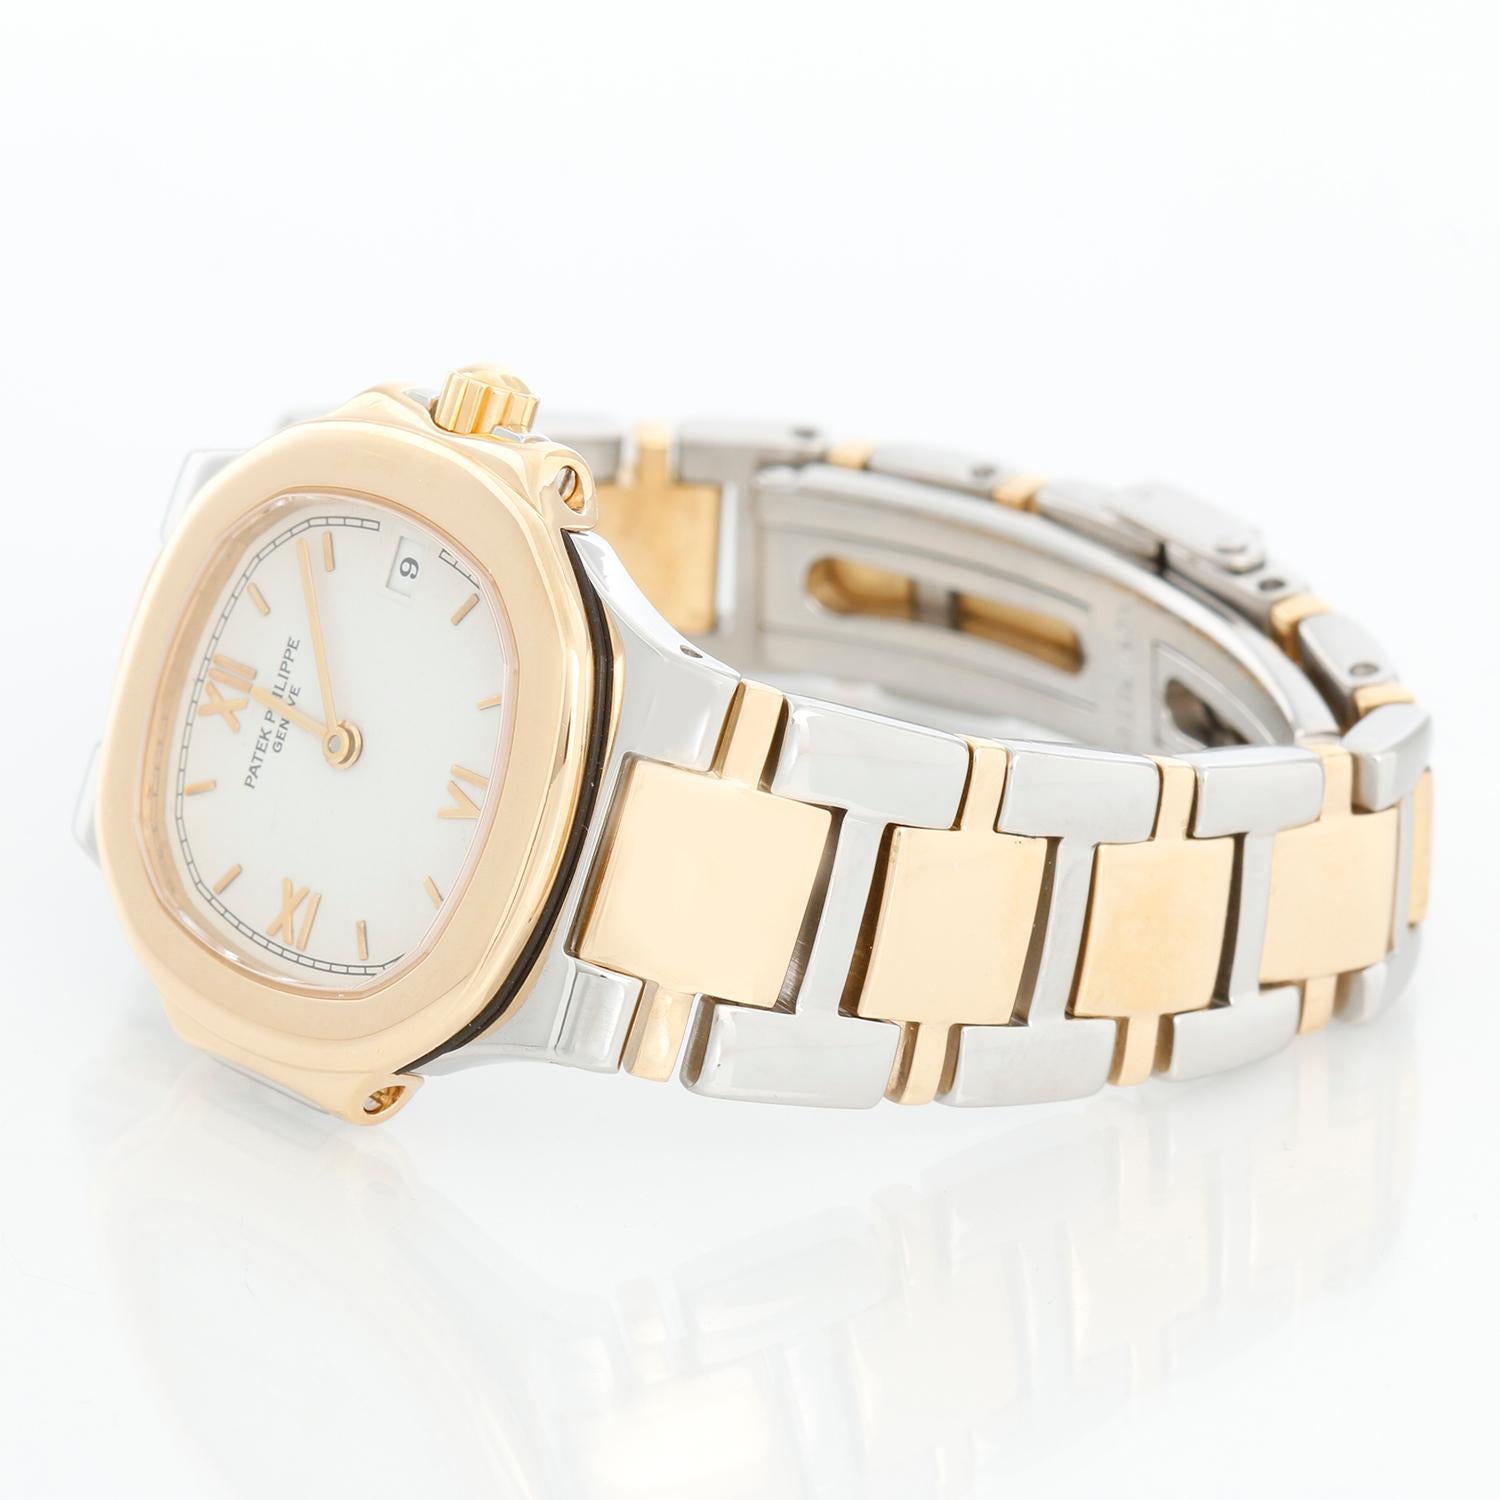 Patek Philippe Nautilus Ladies Steel Gold 2-Tone  Watch  4700/61 - Quartz. Stainless steel case with 18k yellow gold bezel (26mm diameter). White  dial with stick markers; date at 3 o'clock position. Stainless steel and 18k yellow gold Nautilus